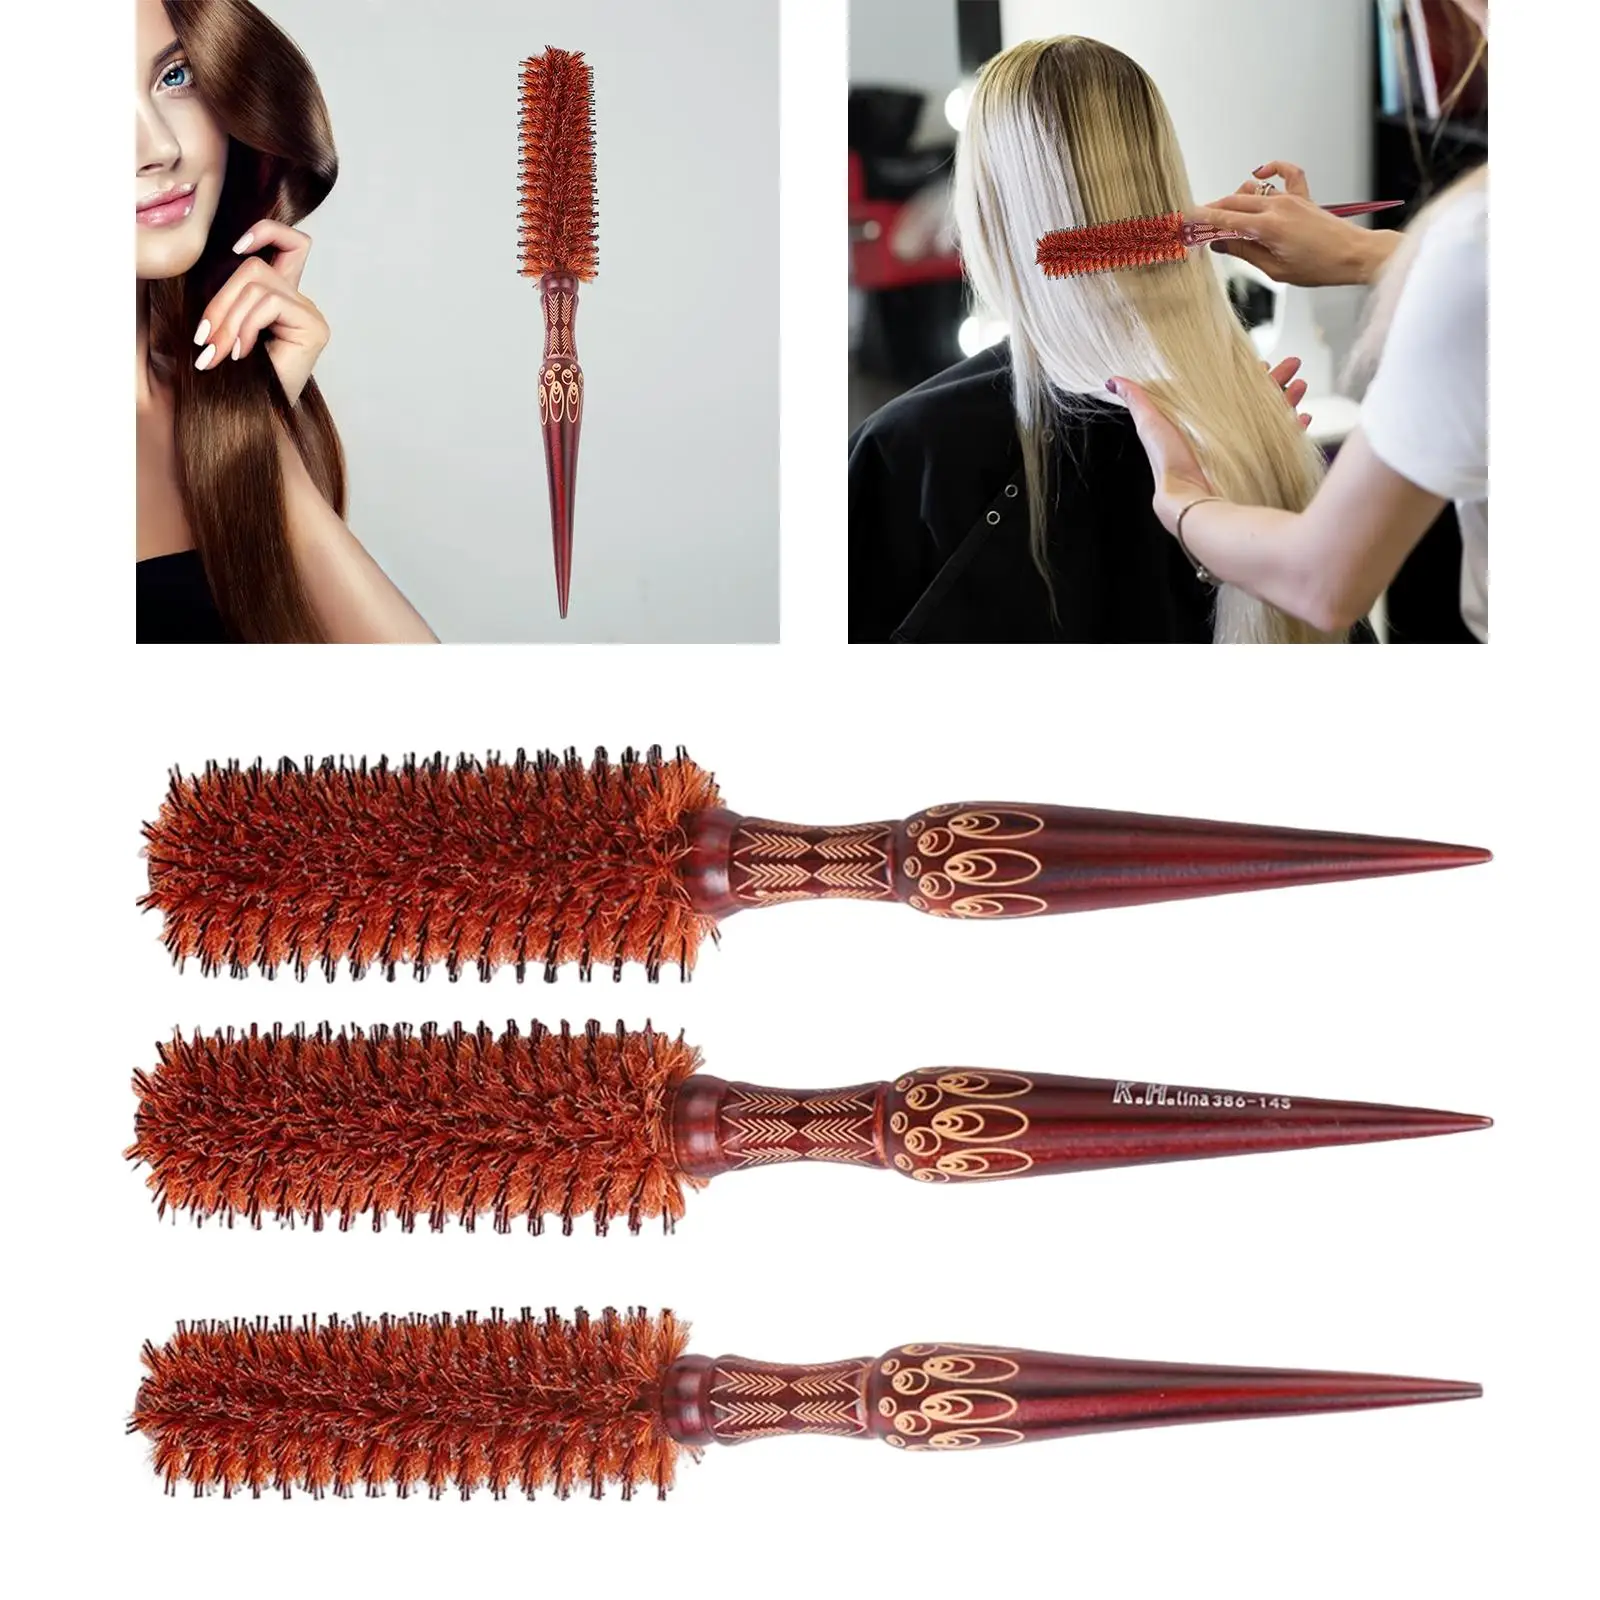 Bristle Round Hair Brush Anti Static Light Weight Styling Tools Hair Curly Comb for Heat Styling Barber Long Hair Salon